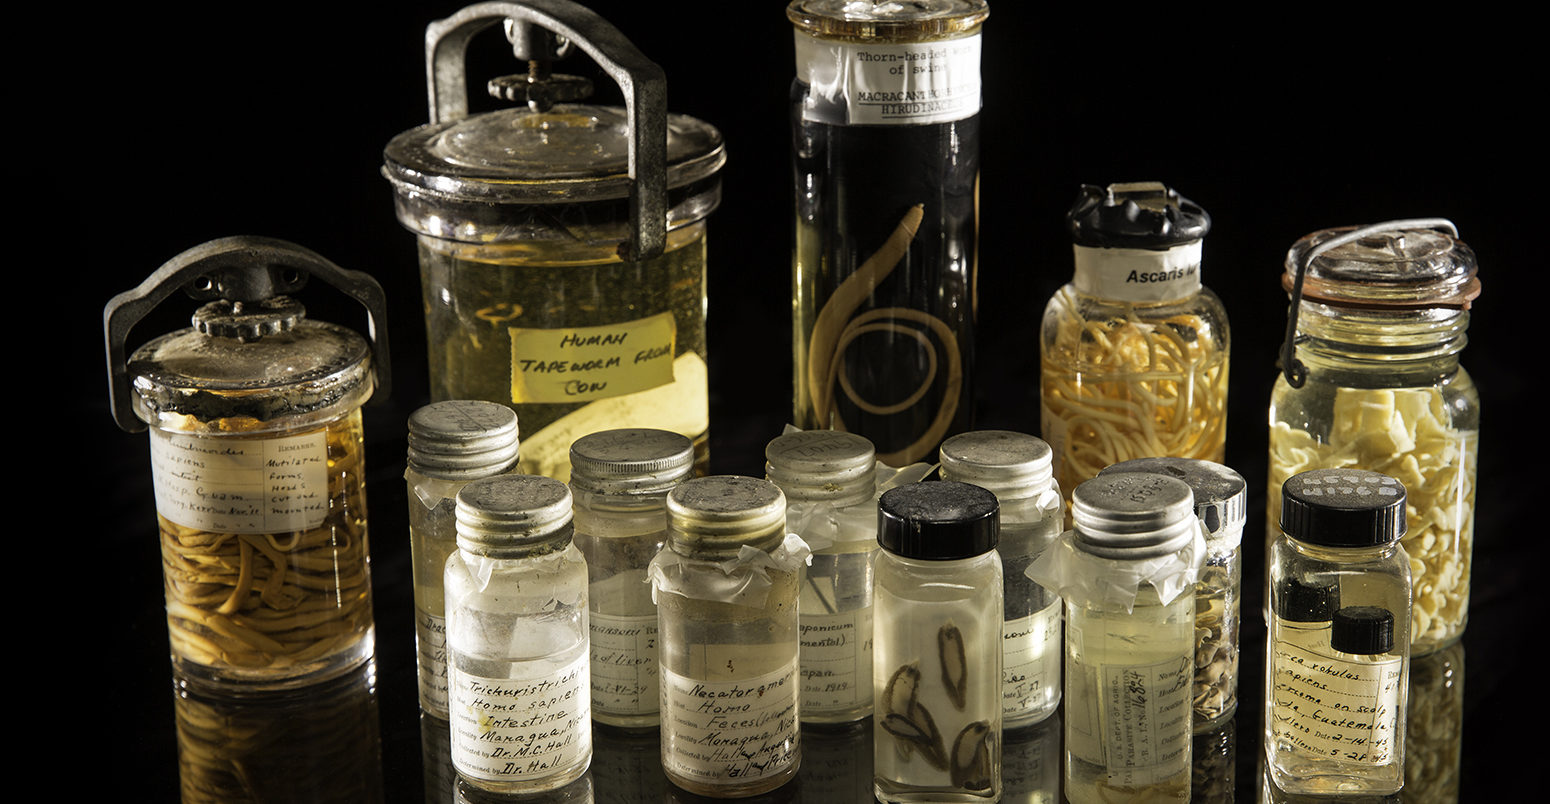 An assortment of specimens from the Smithsonian's National Parasite Collection at the National Museum of Natural History. The National Parasite Collection holds millions of parasite specimens in connection with information about their geographic distribution. The research team drew on this collection to analyze the impact of climate change on parasites.